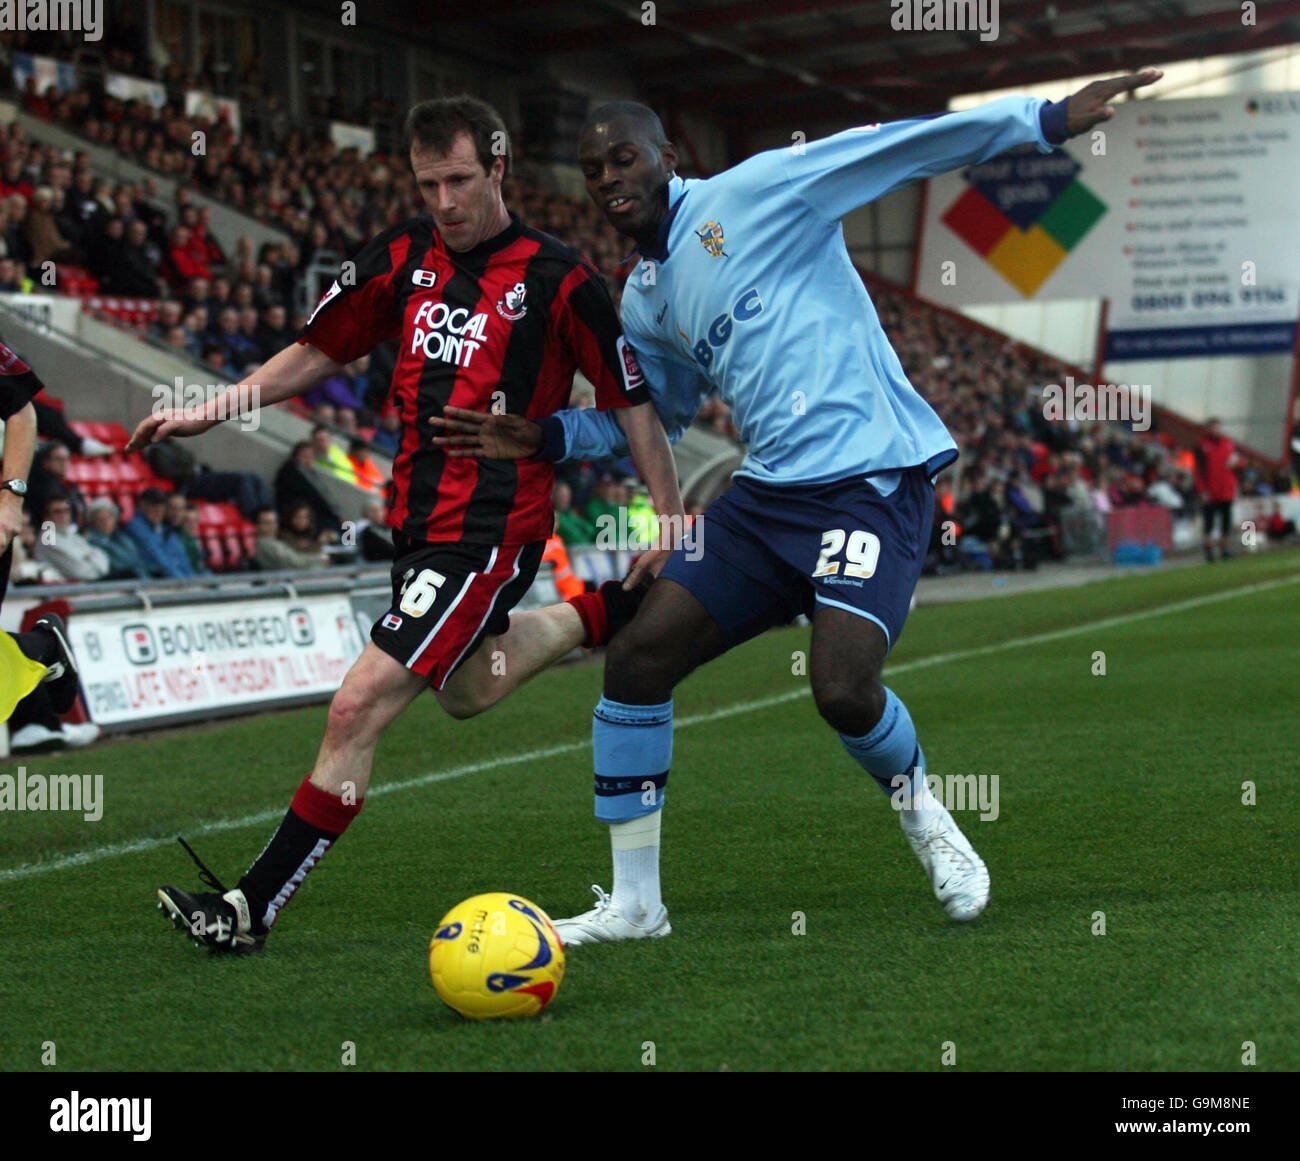 Bournemouth's Steve Claridge tussles with Port Vale's Clayton Fortune during the League One match at the Dean Court Ground, Bournemouth. Stock Photo